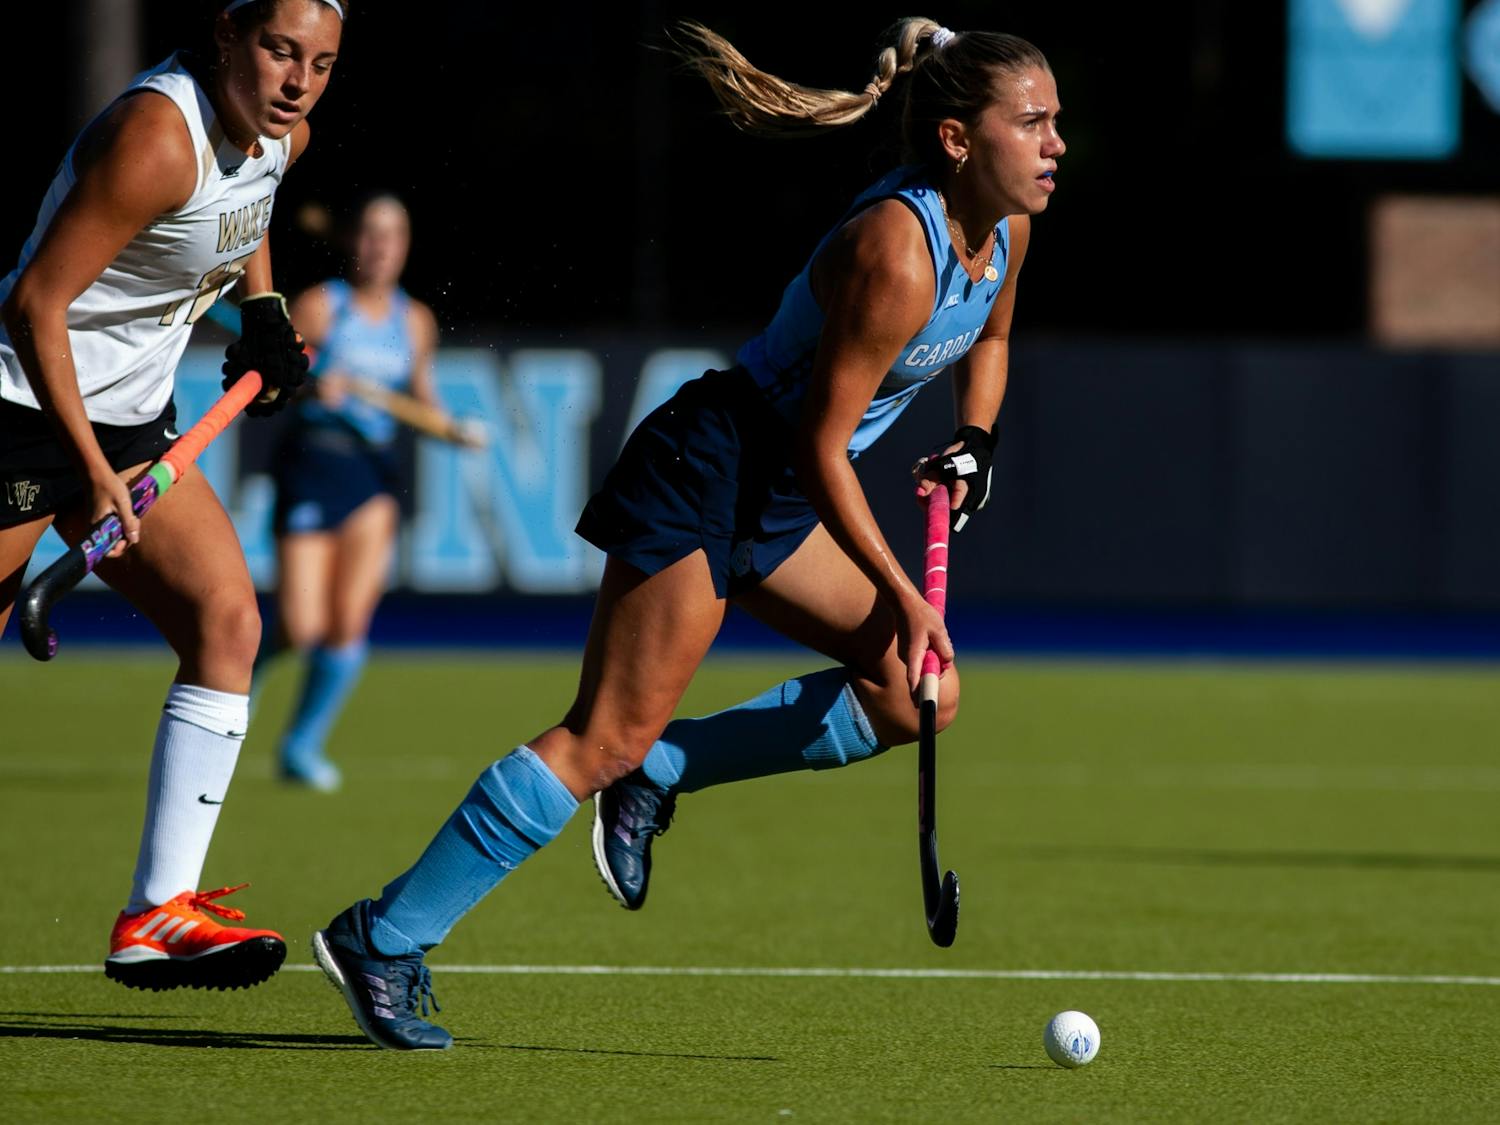 UNC first-year forward Ashley Sessa (3) protects the ball during the Tar Heels' 1-0 victory against Wake Forest on Friday, Sept. 23, 2022, at Karen Shelton Stadium.